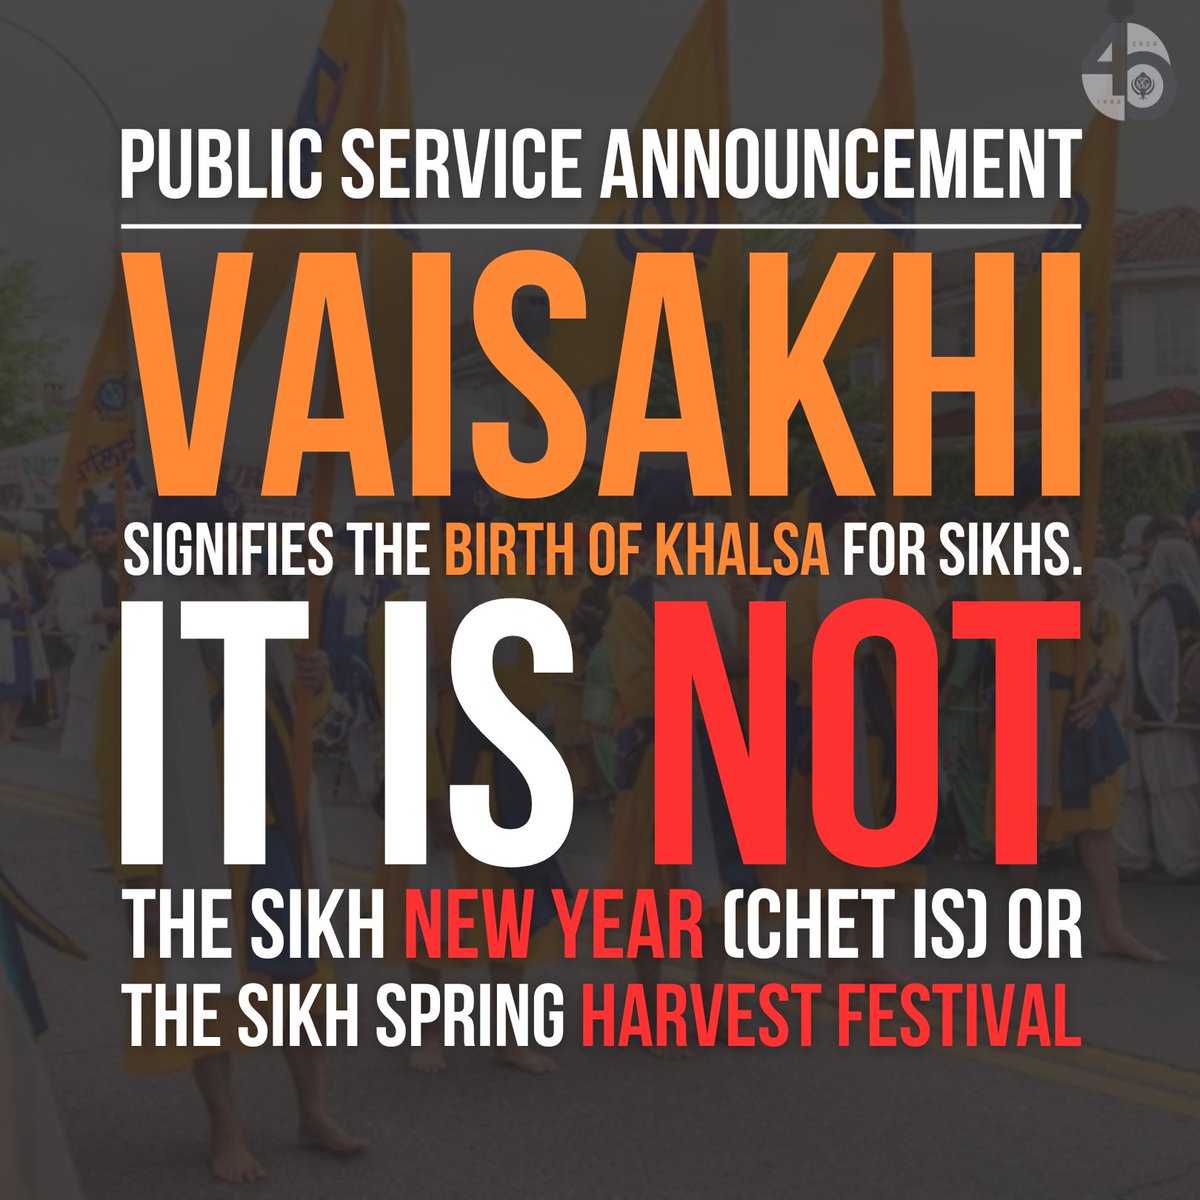 PUBLIC SERVICE ANNOUNCEMENT! We’ve noticed that certain organizations (@RegionofDurham @YMCAEastSurrey @PeelSchools) are posting inaccurate messages on Vaisakhi. Vaisakhi signifies the birth of Khalsa for Sikhs. It is NOT the Sikh New Year (Chet is) OR the Sikh Spring Harvest